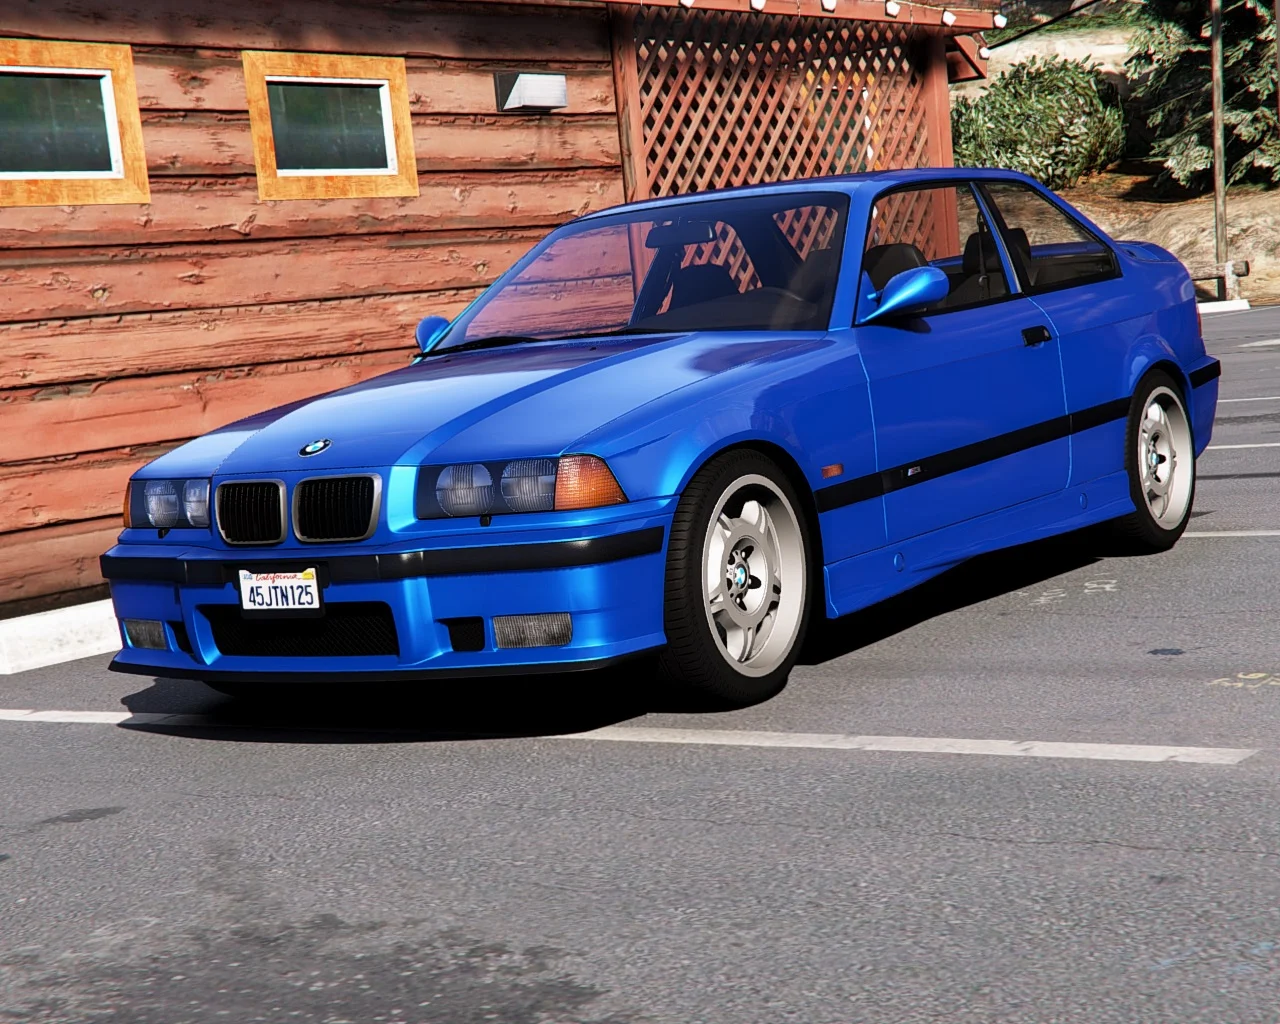 BMW M3 E36 1997 [Add-On | VehFuncs V | Tuning | Template] 3.0